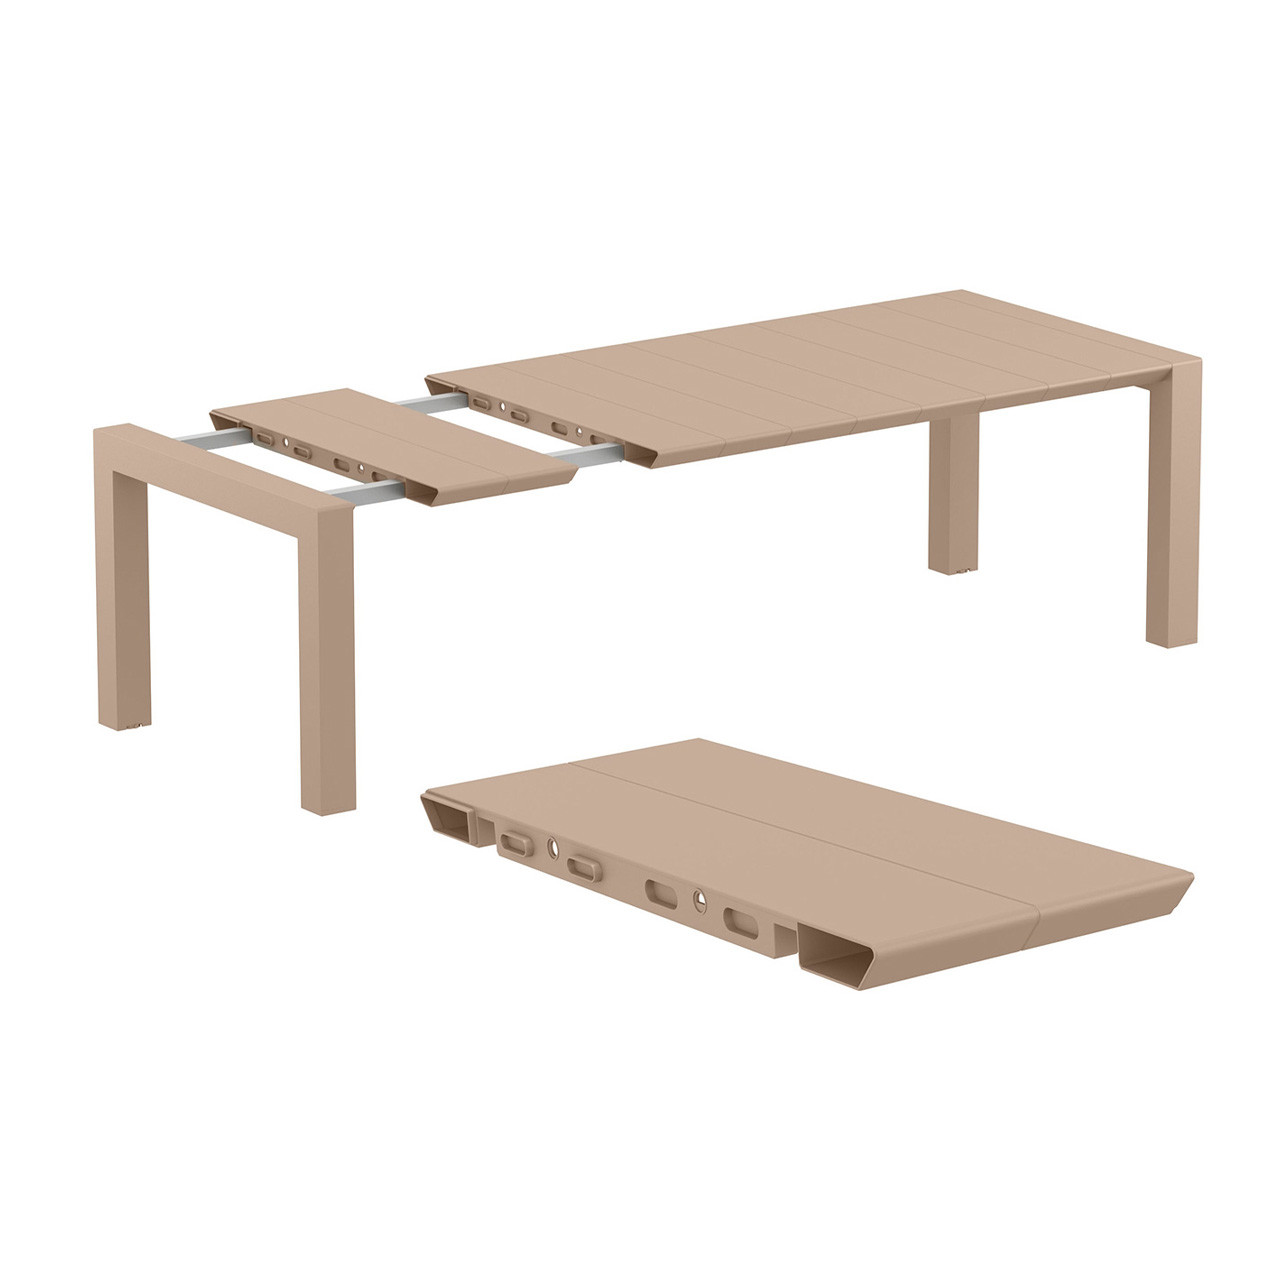 Pacifica Taupe Polypropylene and Taupe Sling 9 Pc. Dining Set with 71-87 x 40 in. Extension Table